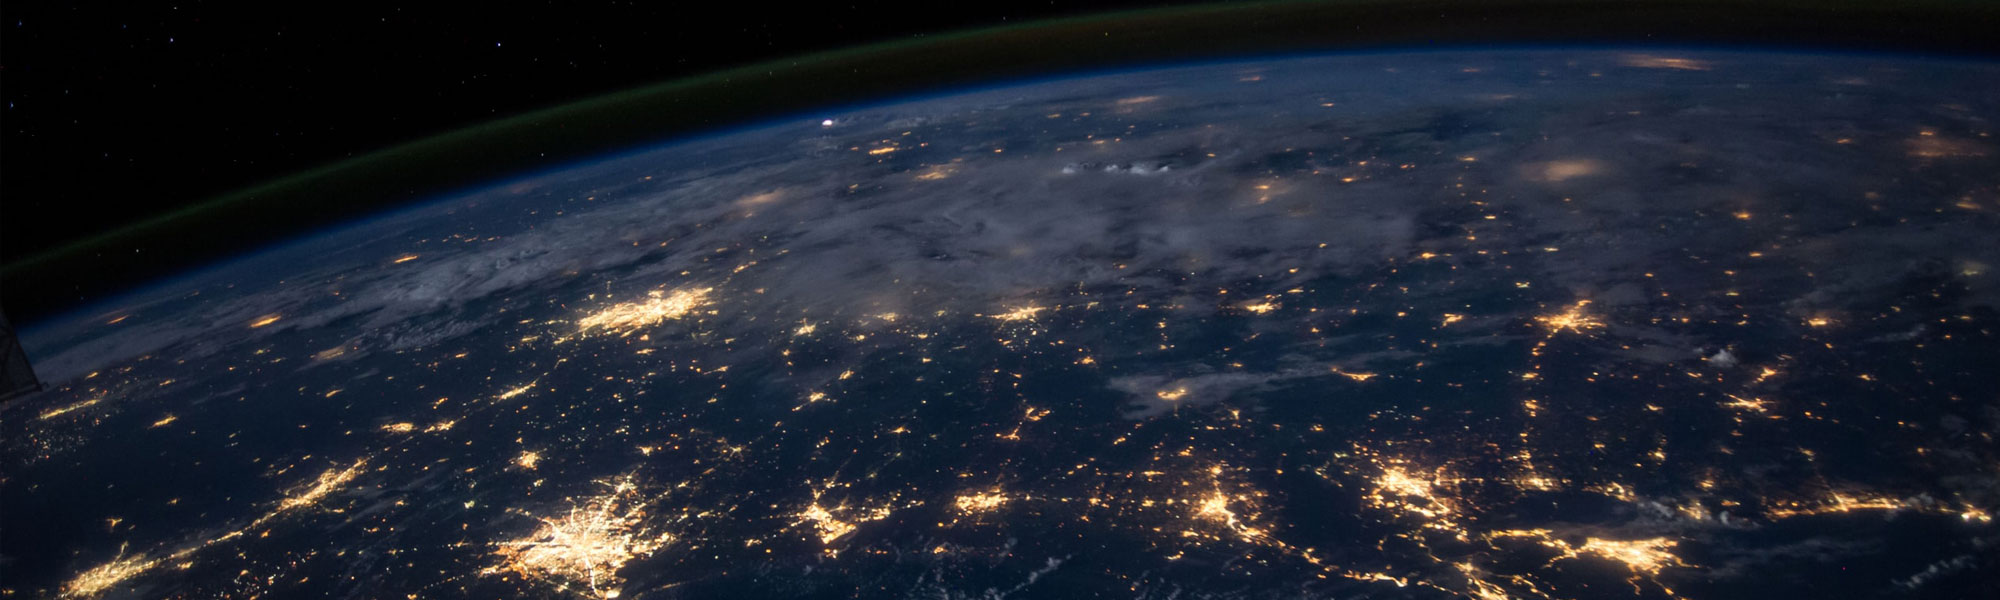 Aerial view of the earth at night with lights